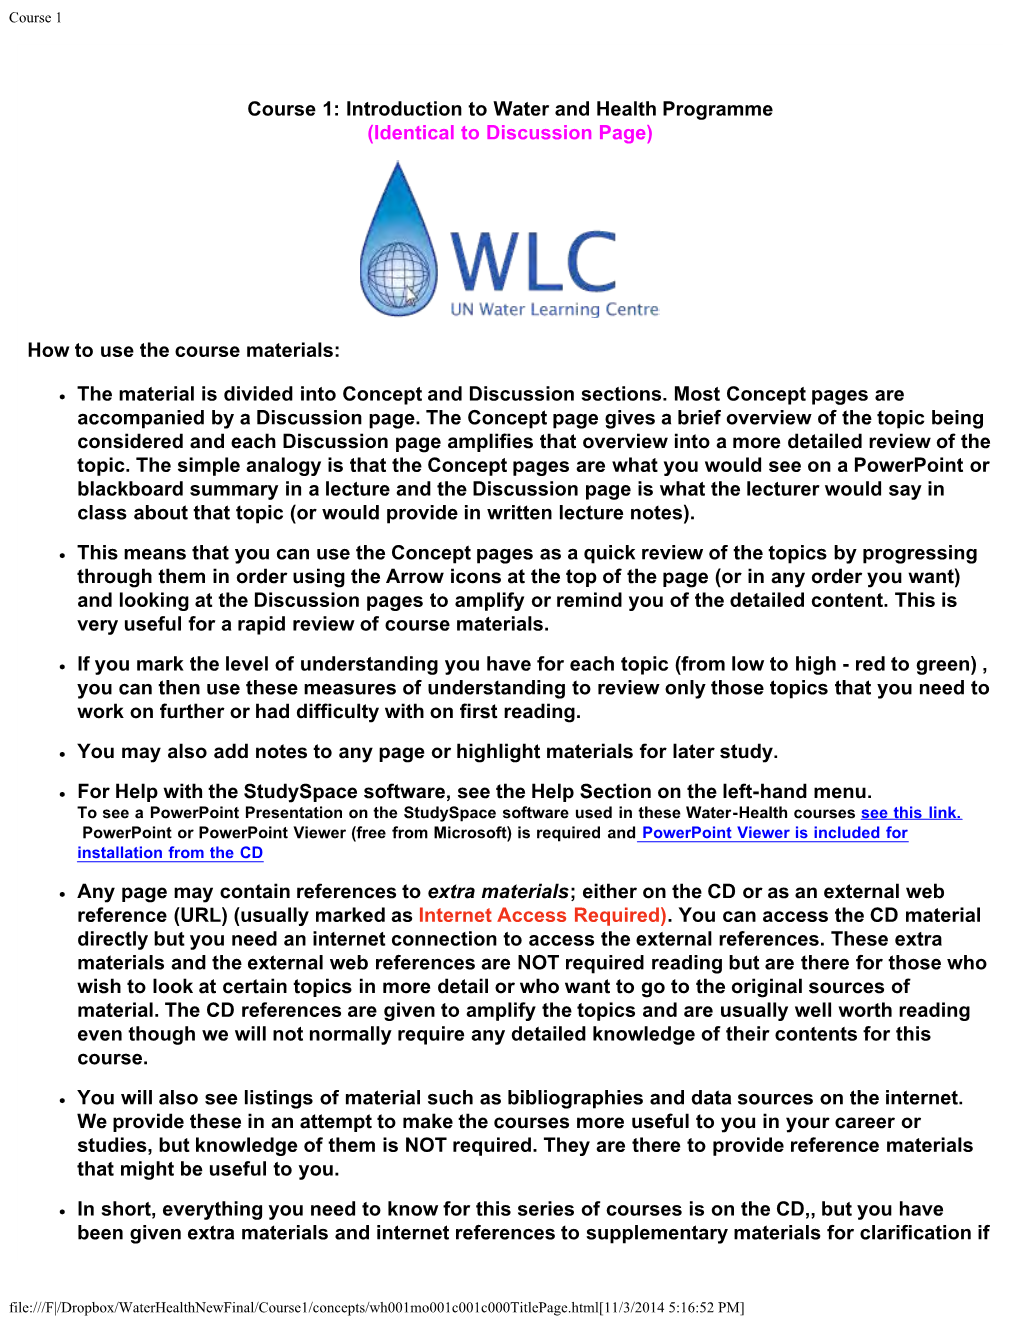 Course 1: Introduction to Water and Health Programme (Identical to Discussion Page)